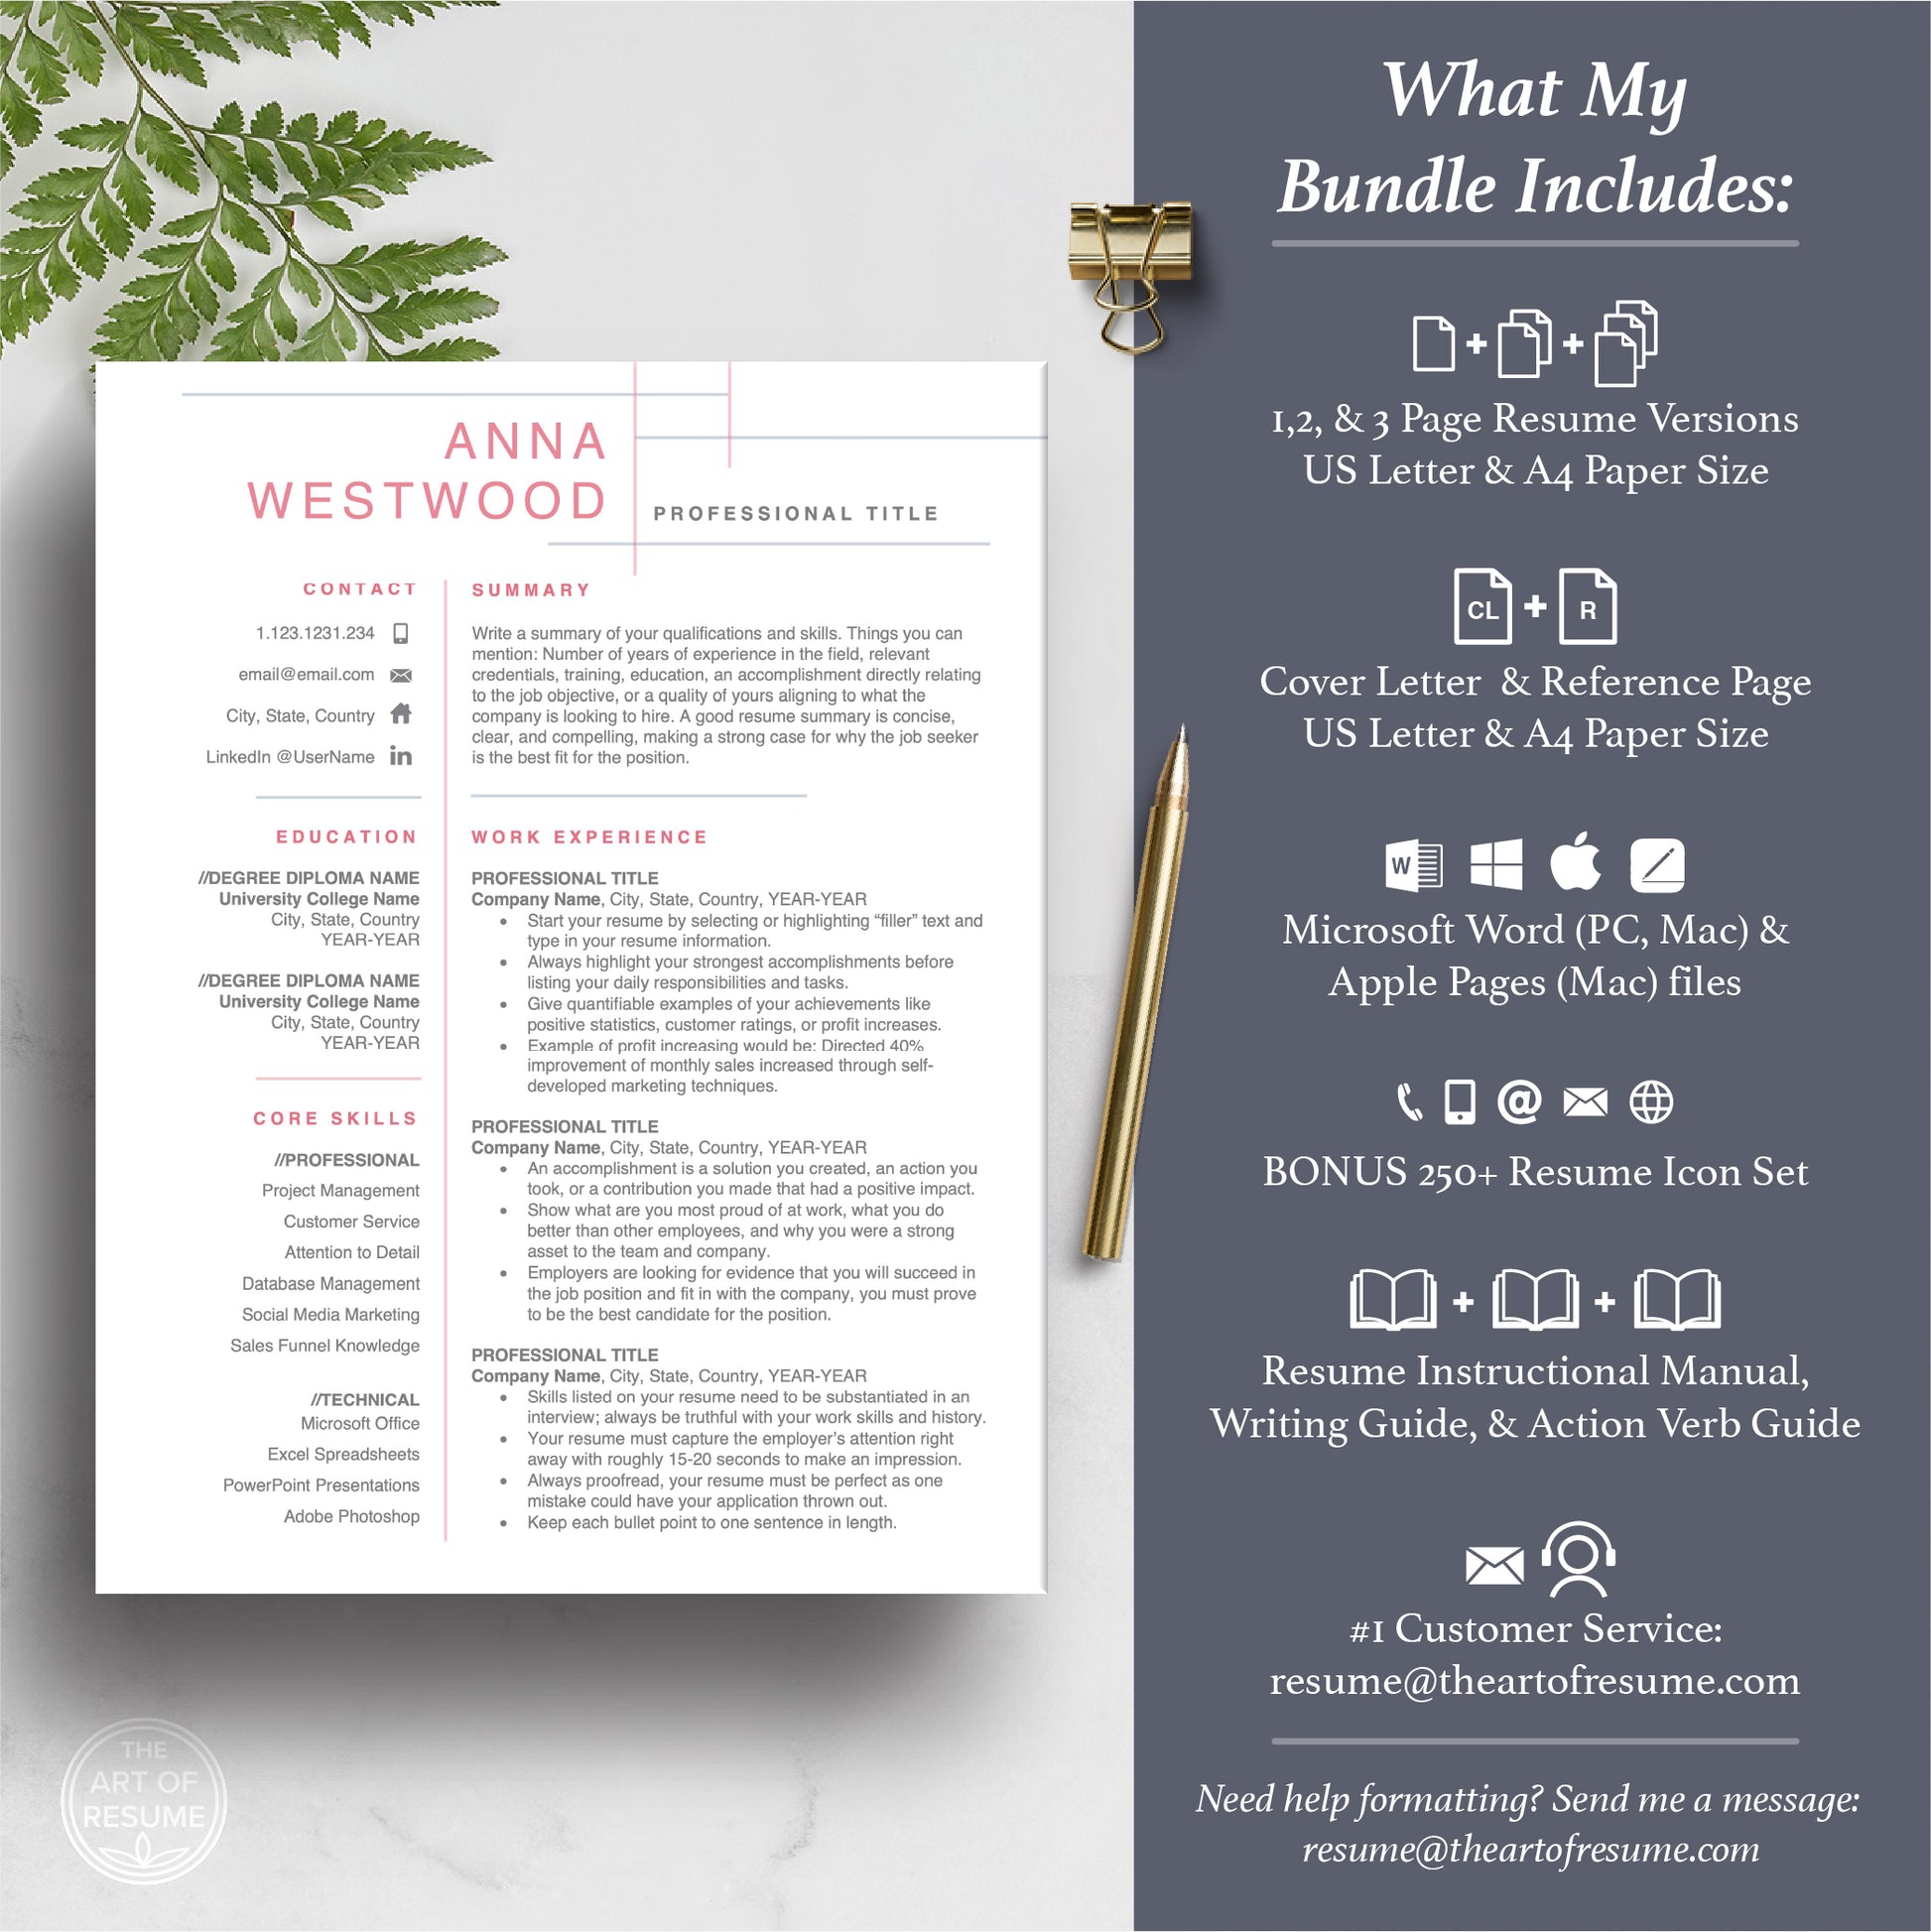 The Art of Resume | Professional Pink Resume Template Bundle | What is included